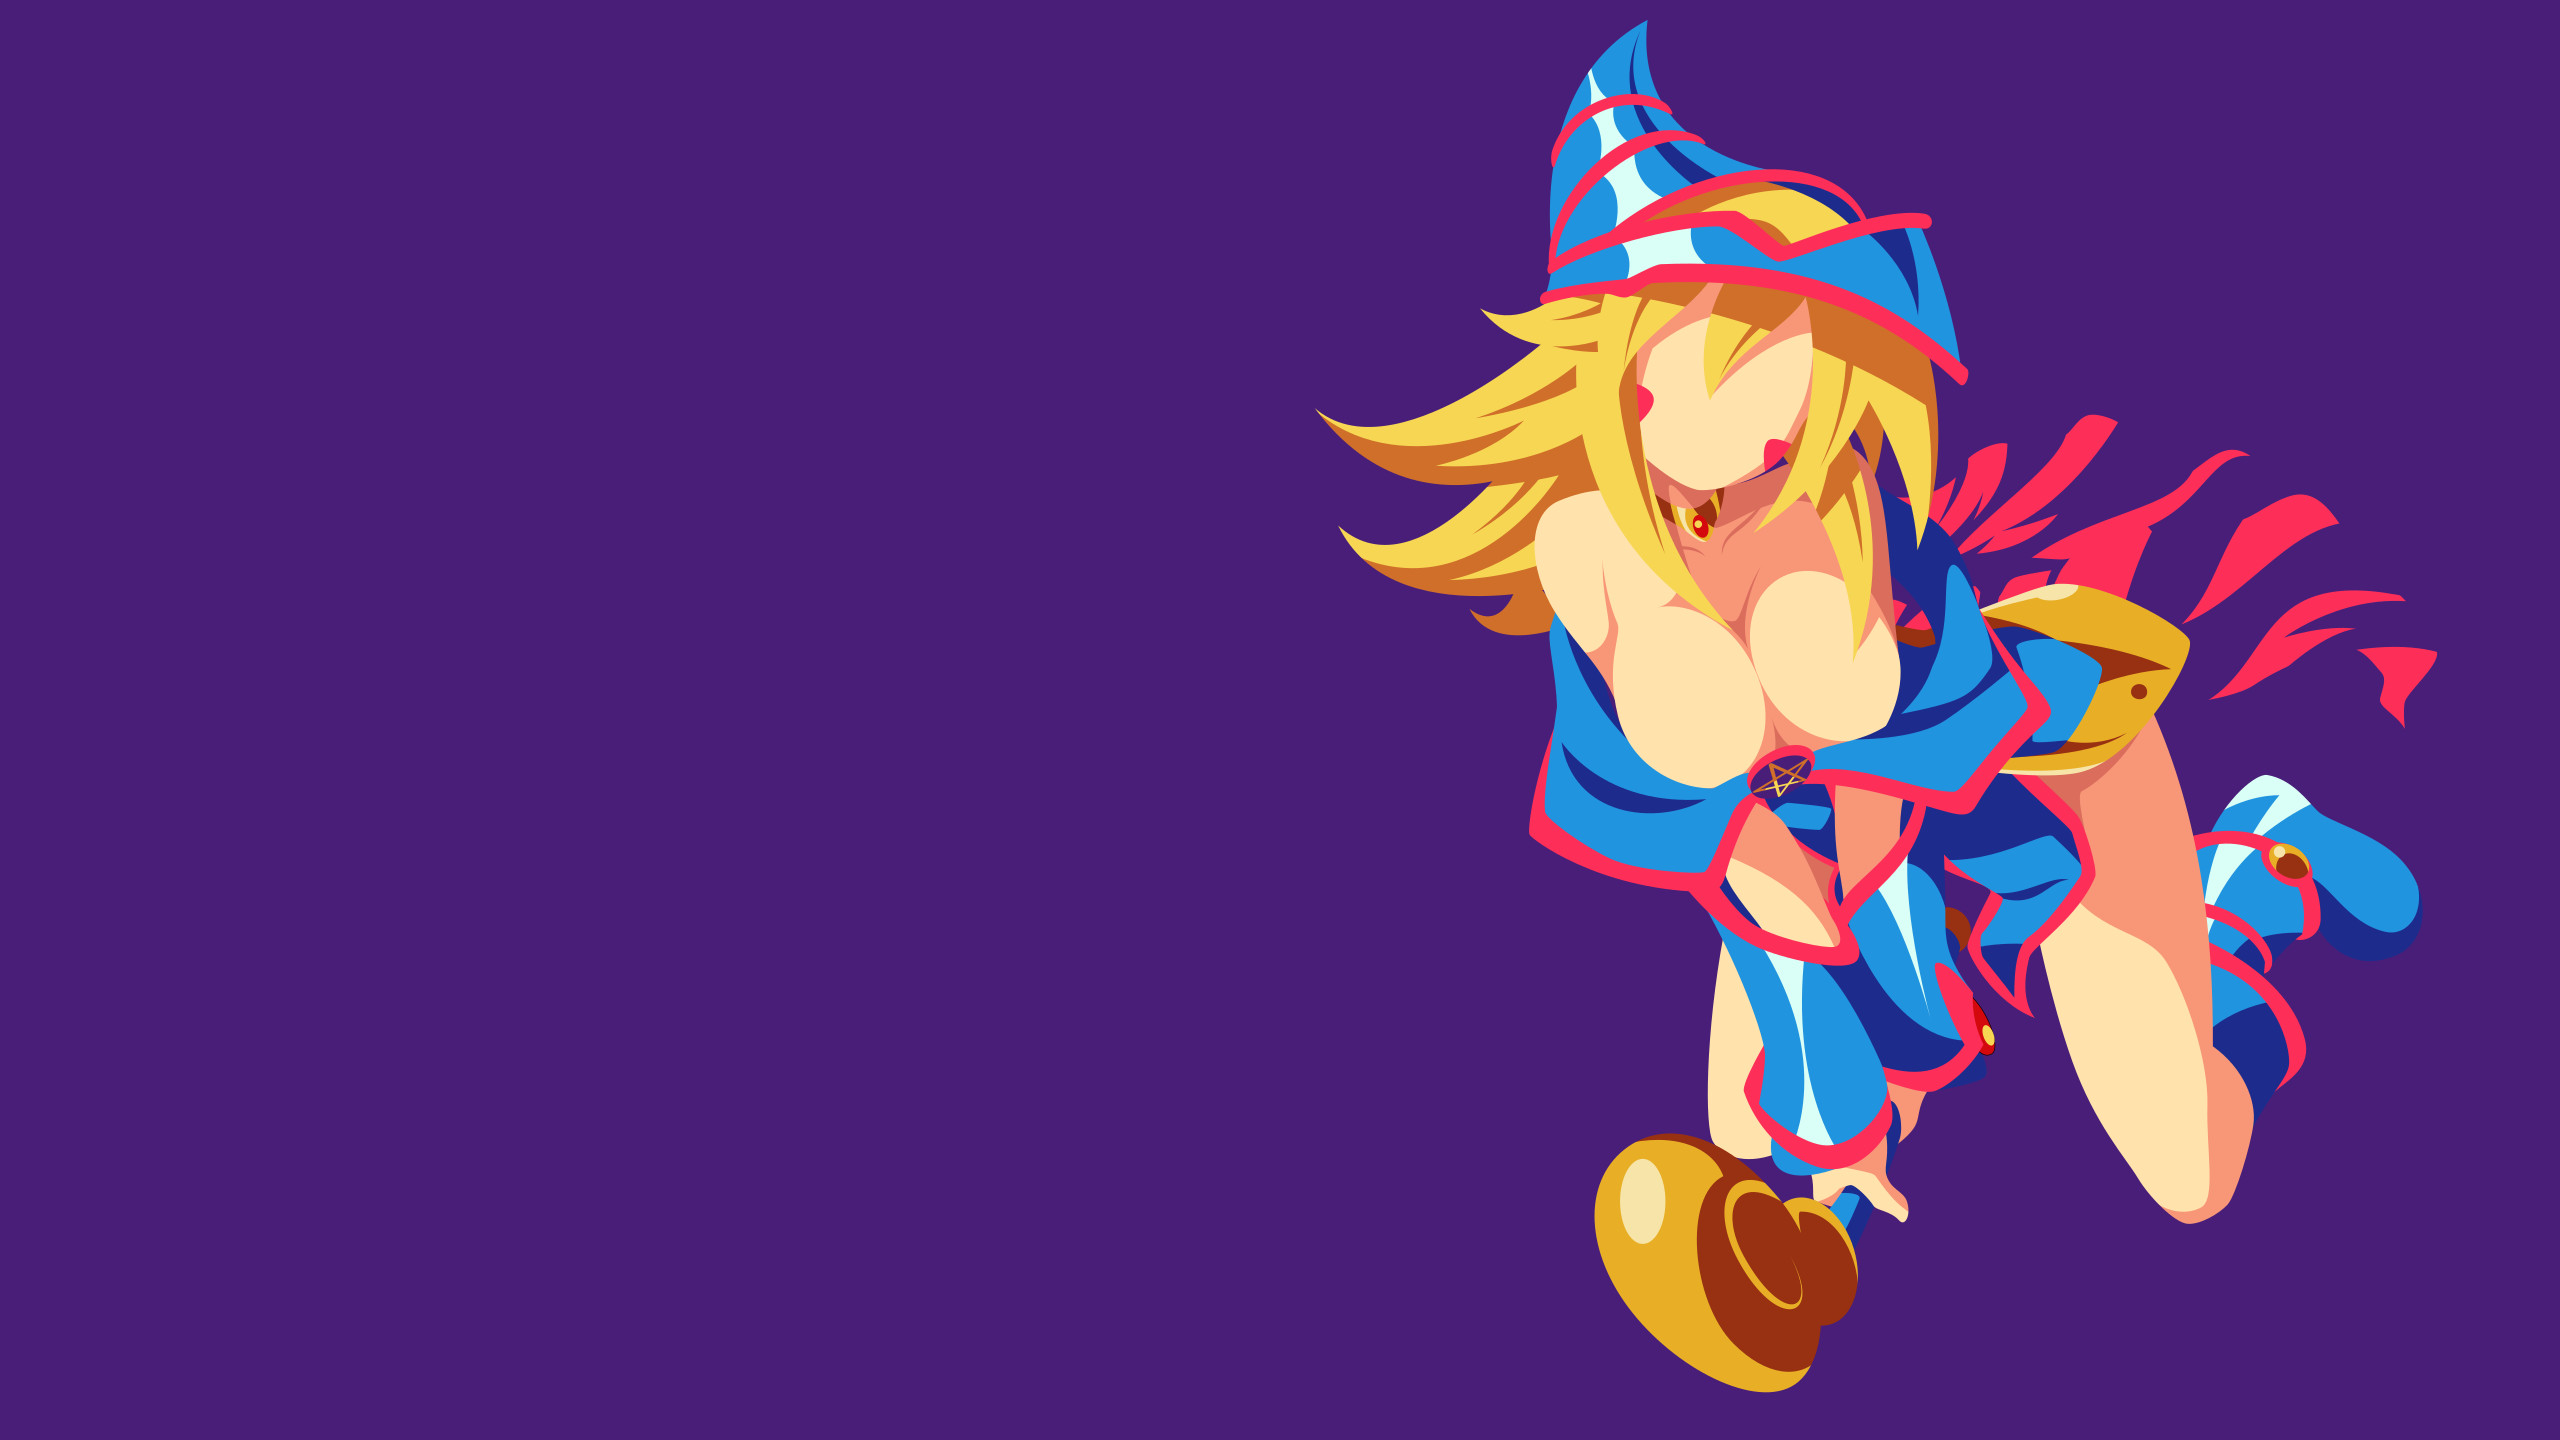 2560x1440 ... YuGiOh - Dark Magician Girl minimalism wallpaper by Carionto